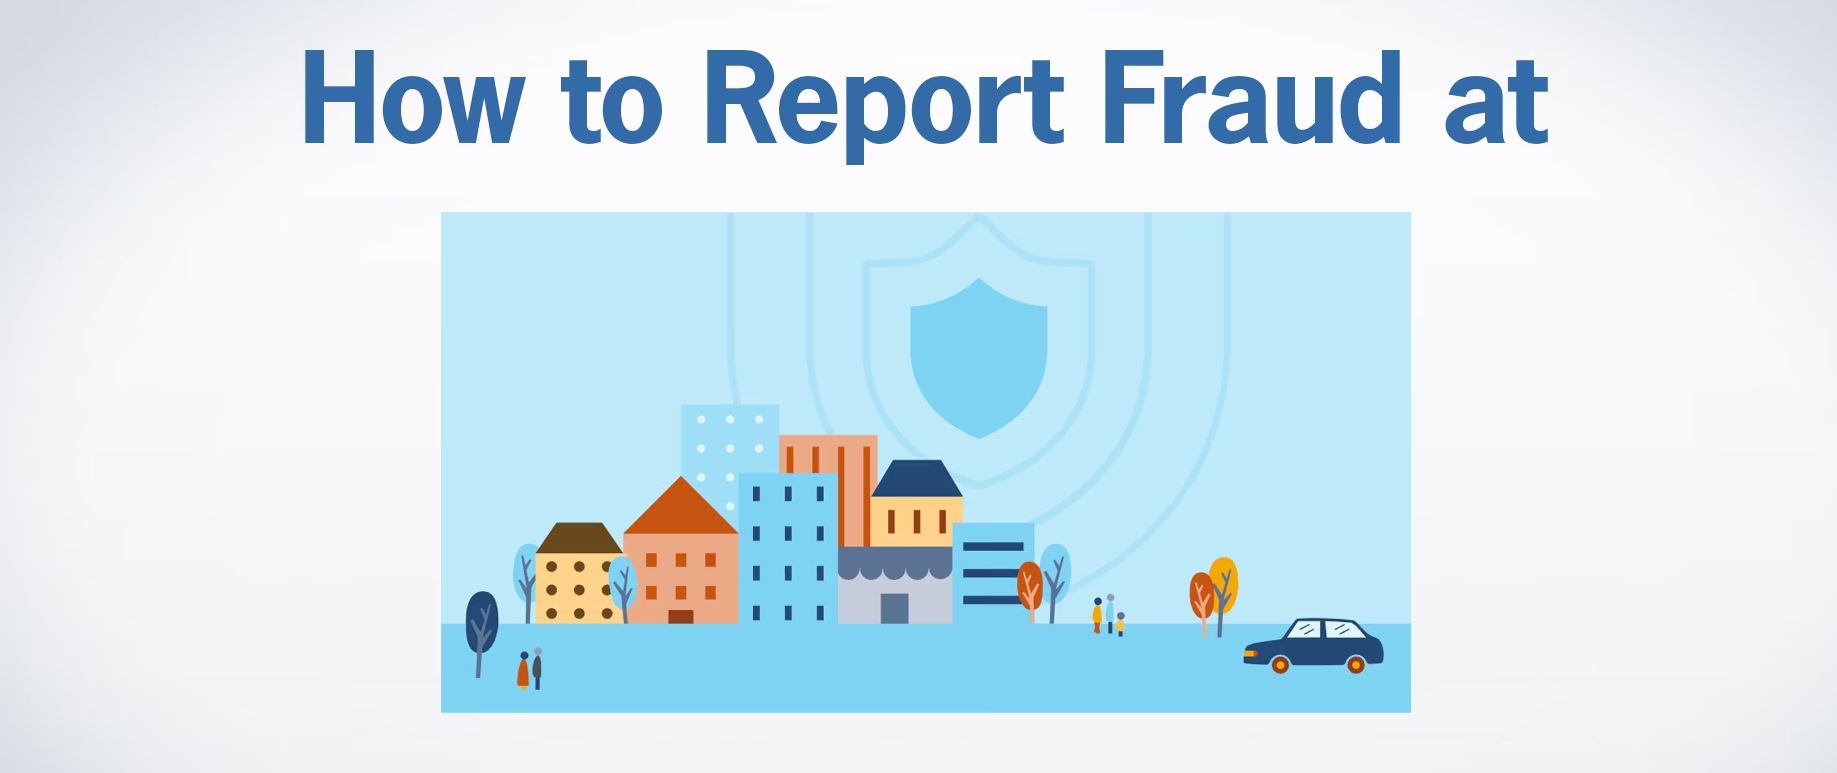 How to Report Fraud